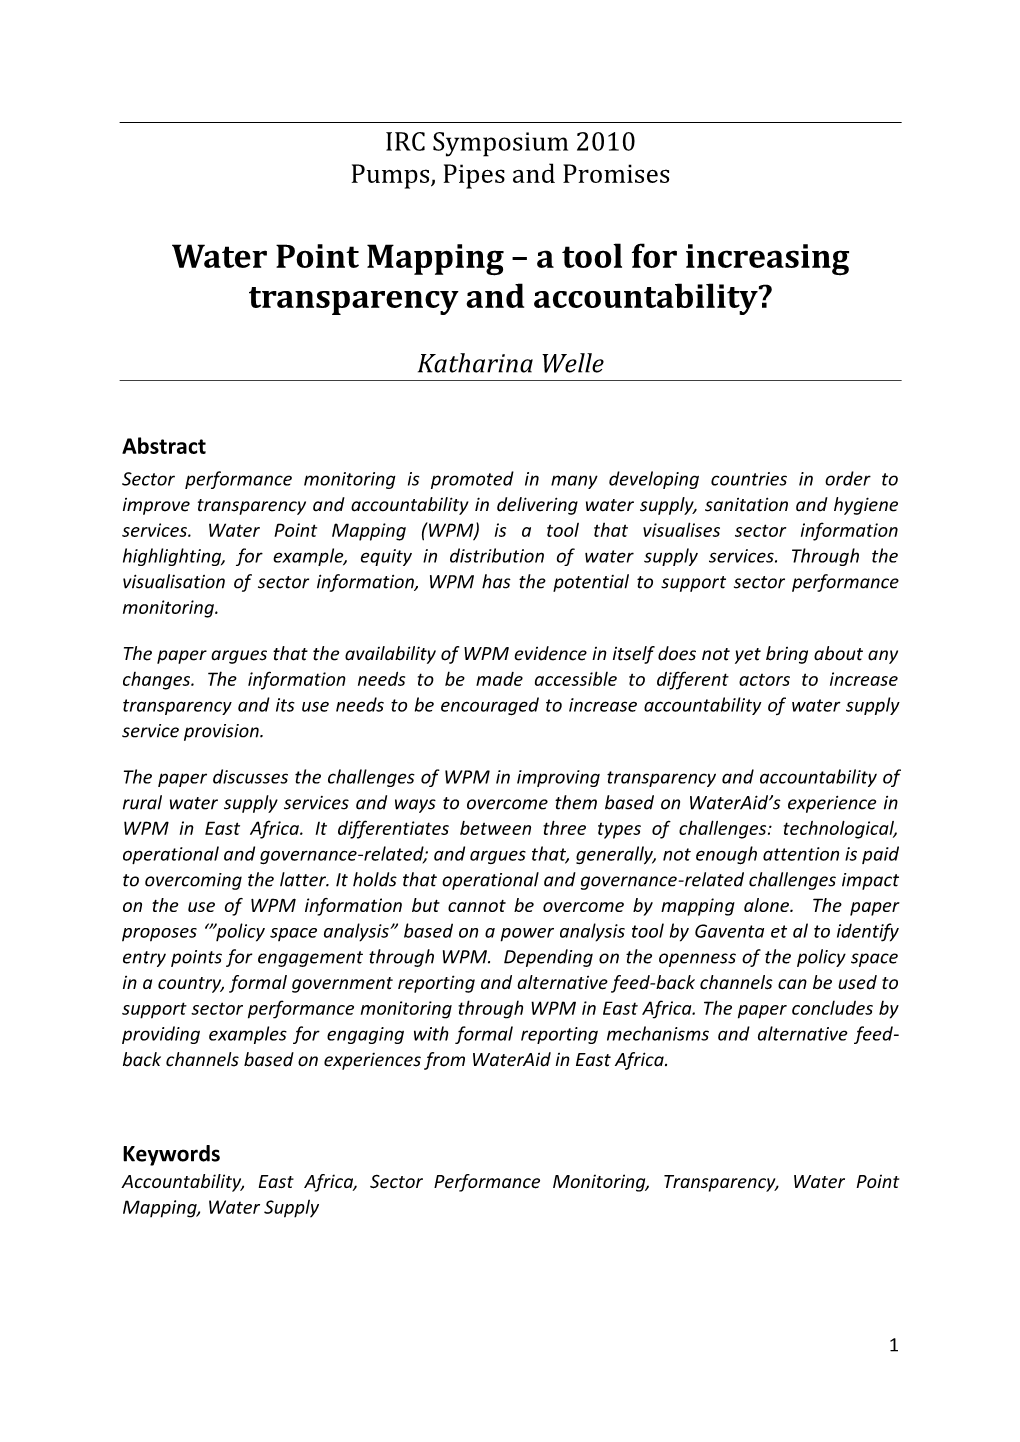 Water Point Mapping – a Tool for Increasing Transparency and Accountability?